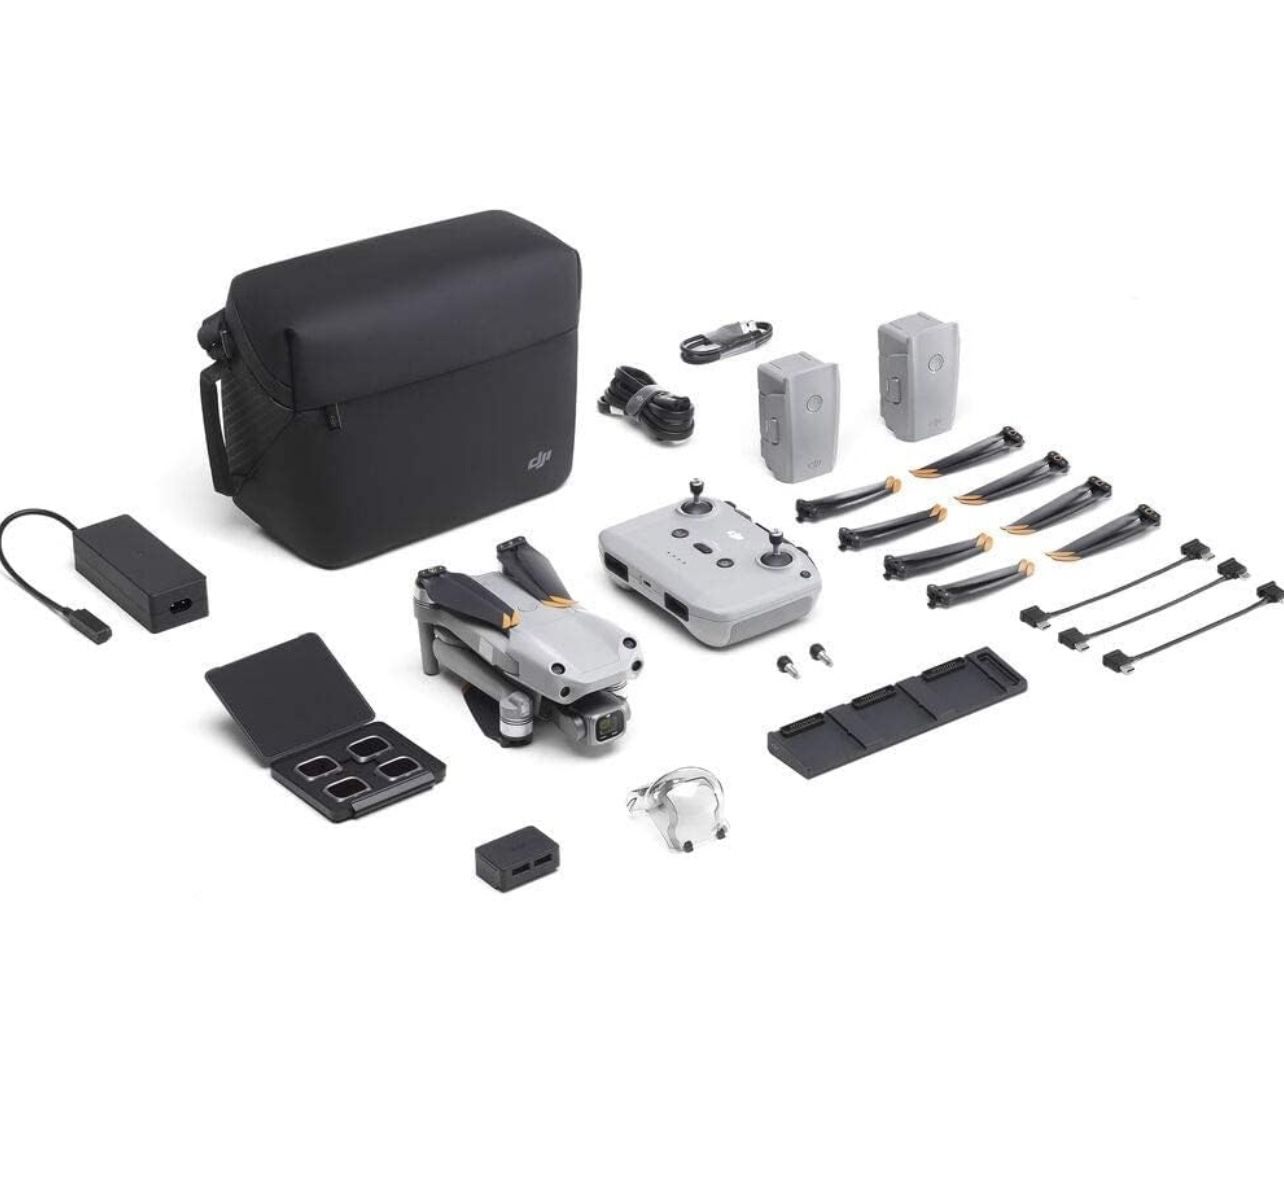 Dji Air 2s Drone With Fly More Bundle Accessories 